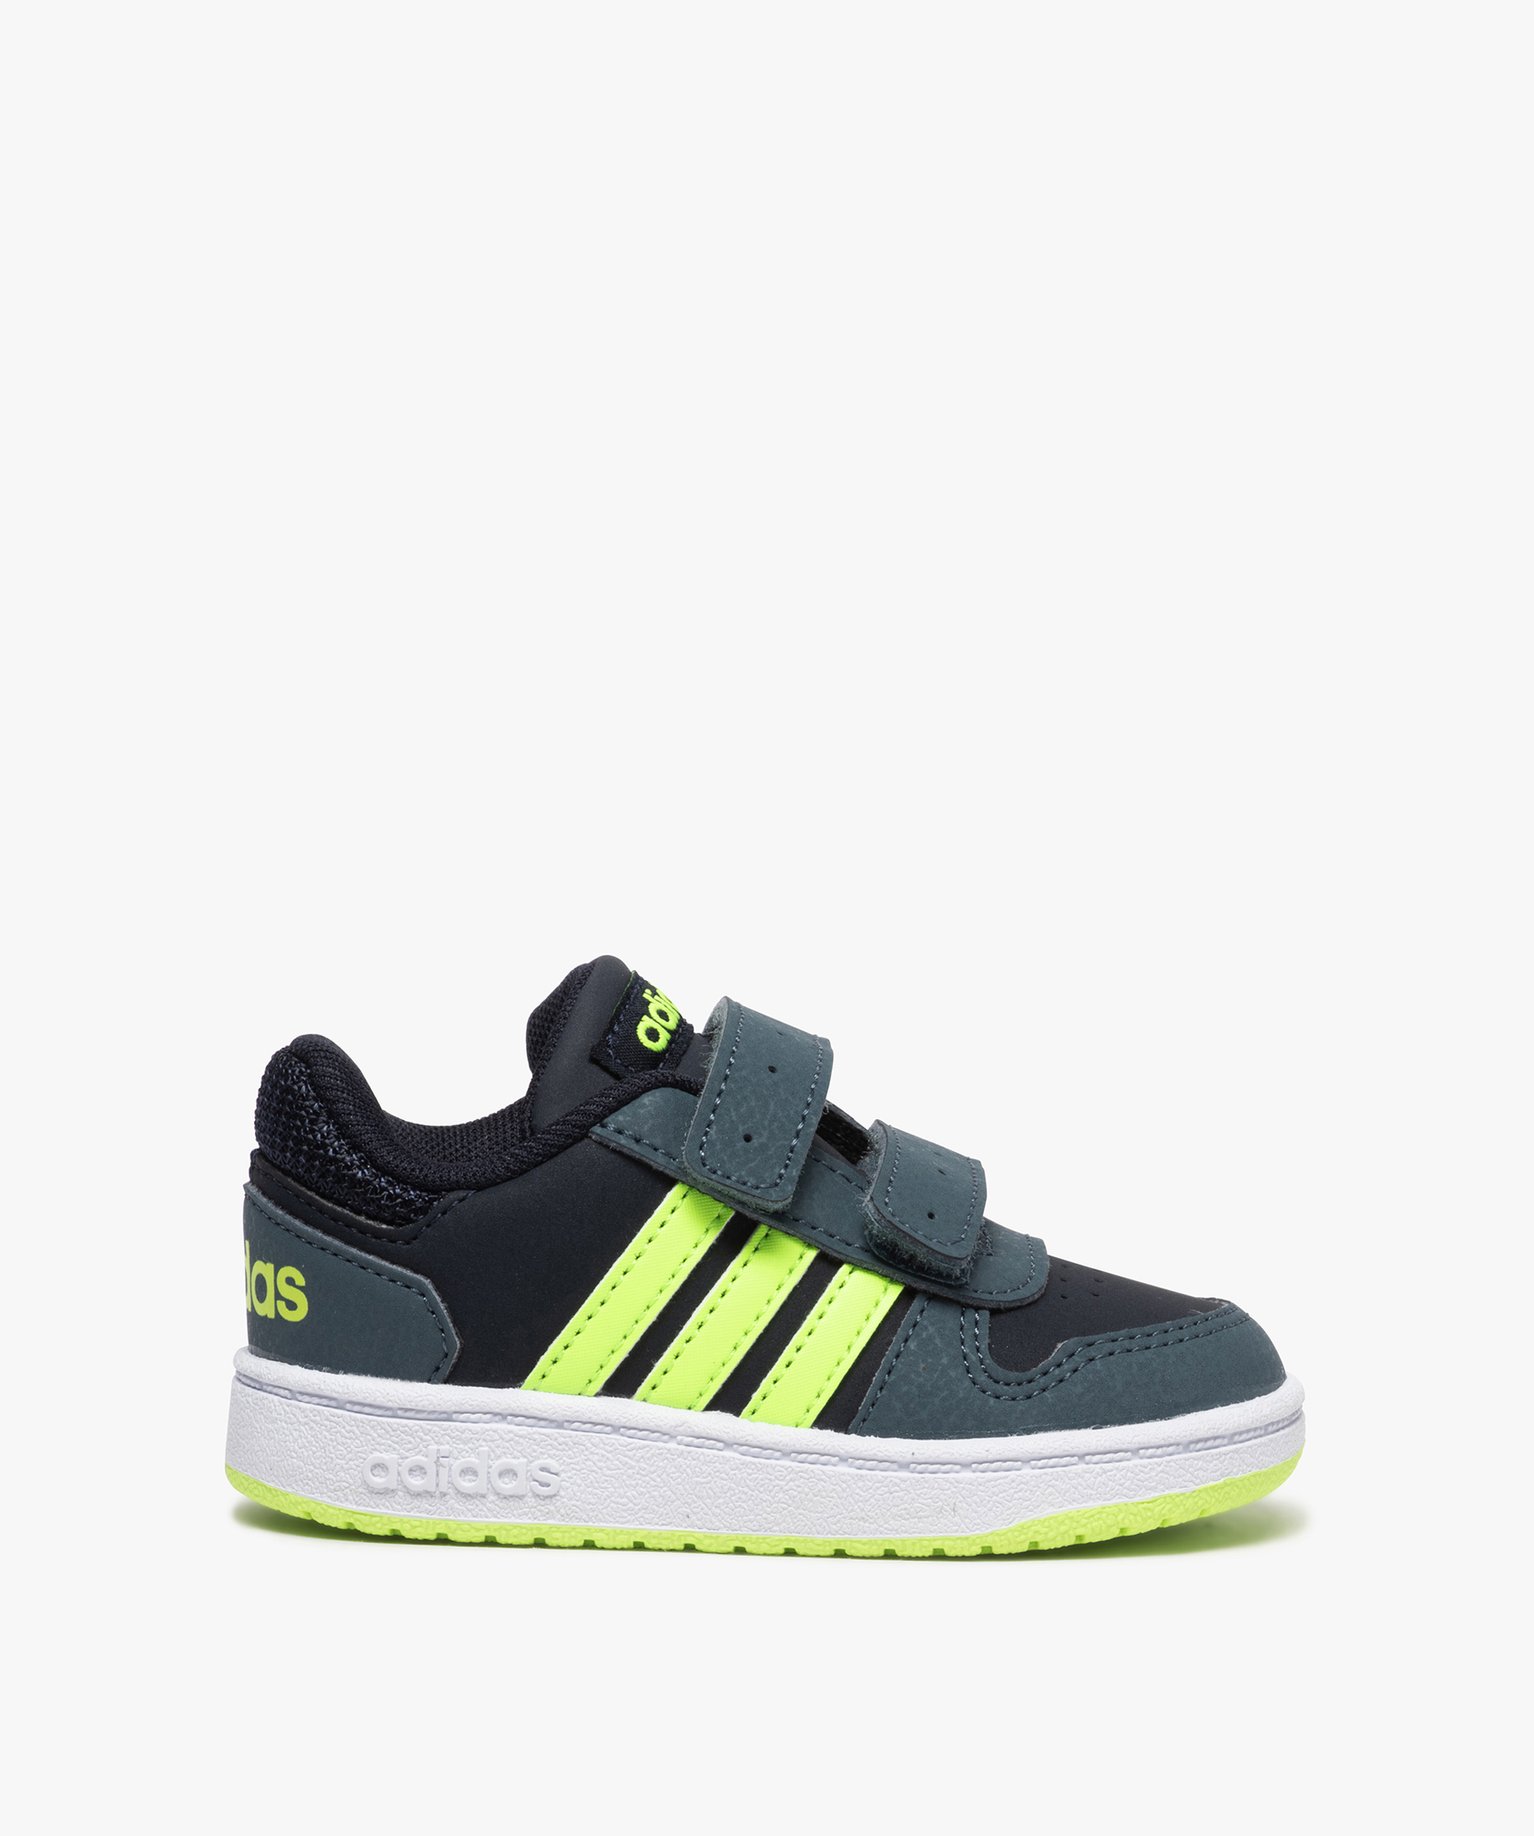 Sandales Bebe Garcon Adidas Best Fashion Discount Online Store All Products Cheaper Than Retail Price Free Delivery Returns Easy Returns And Exchanges